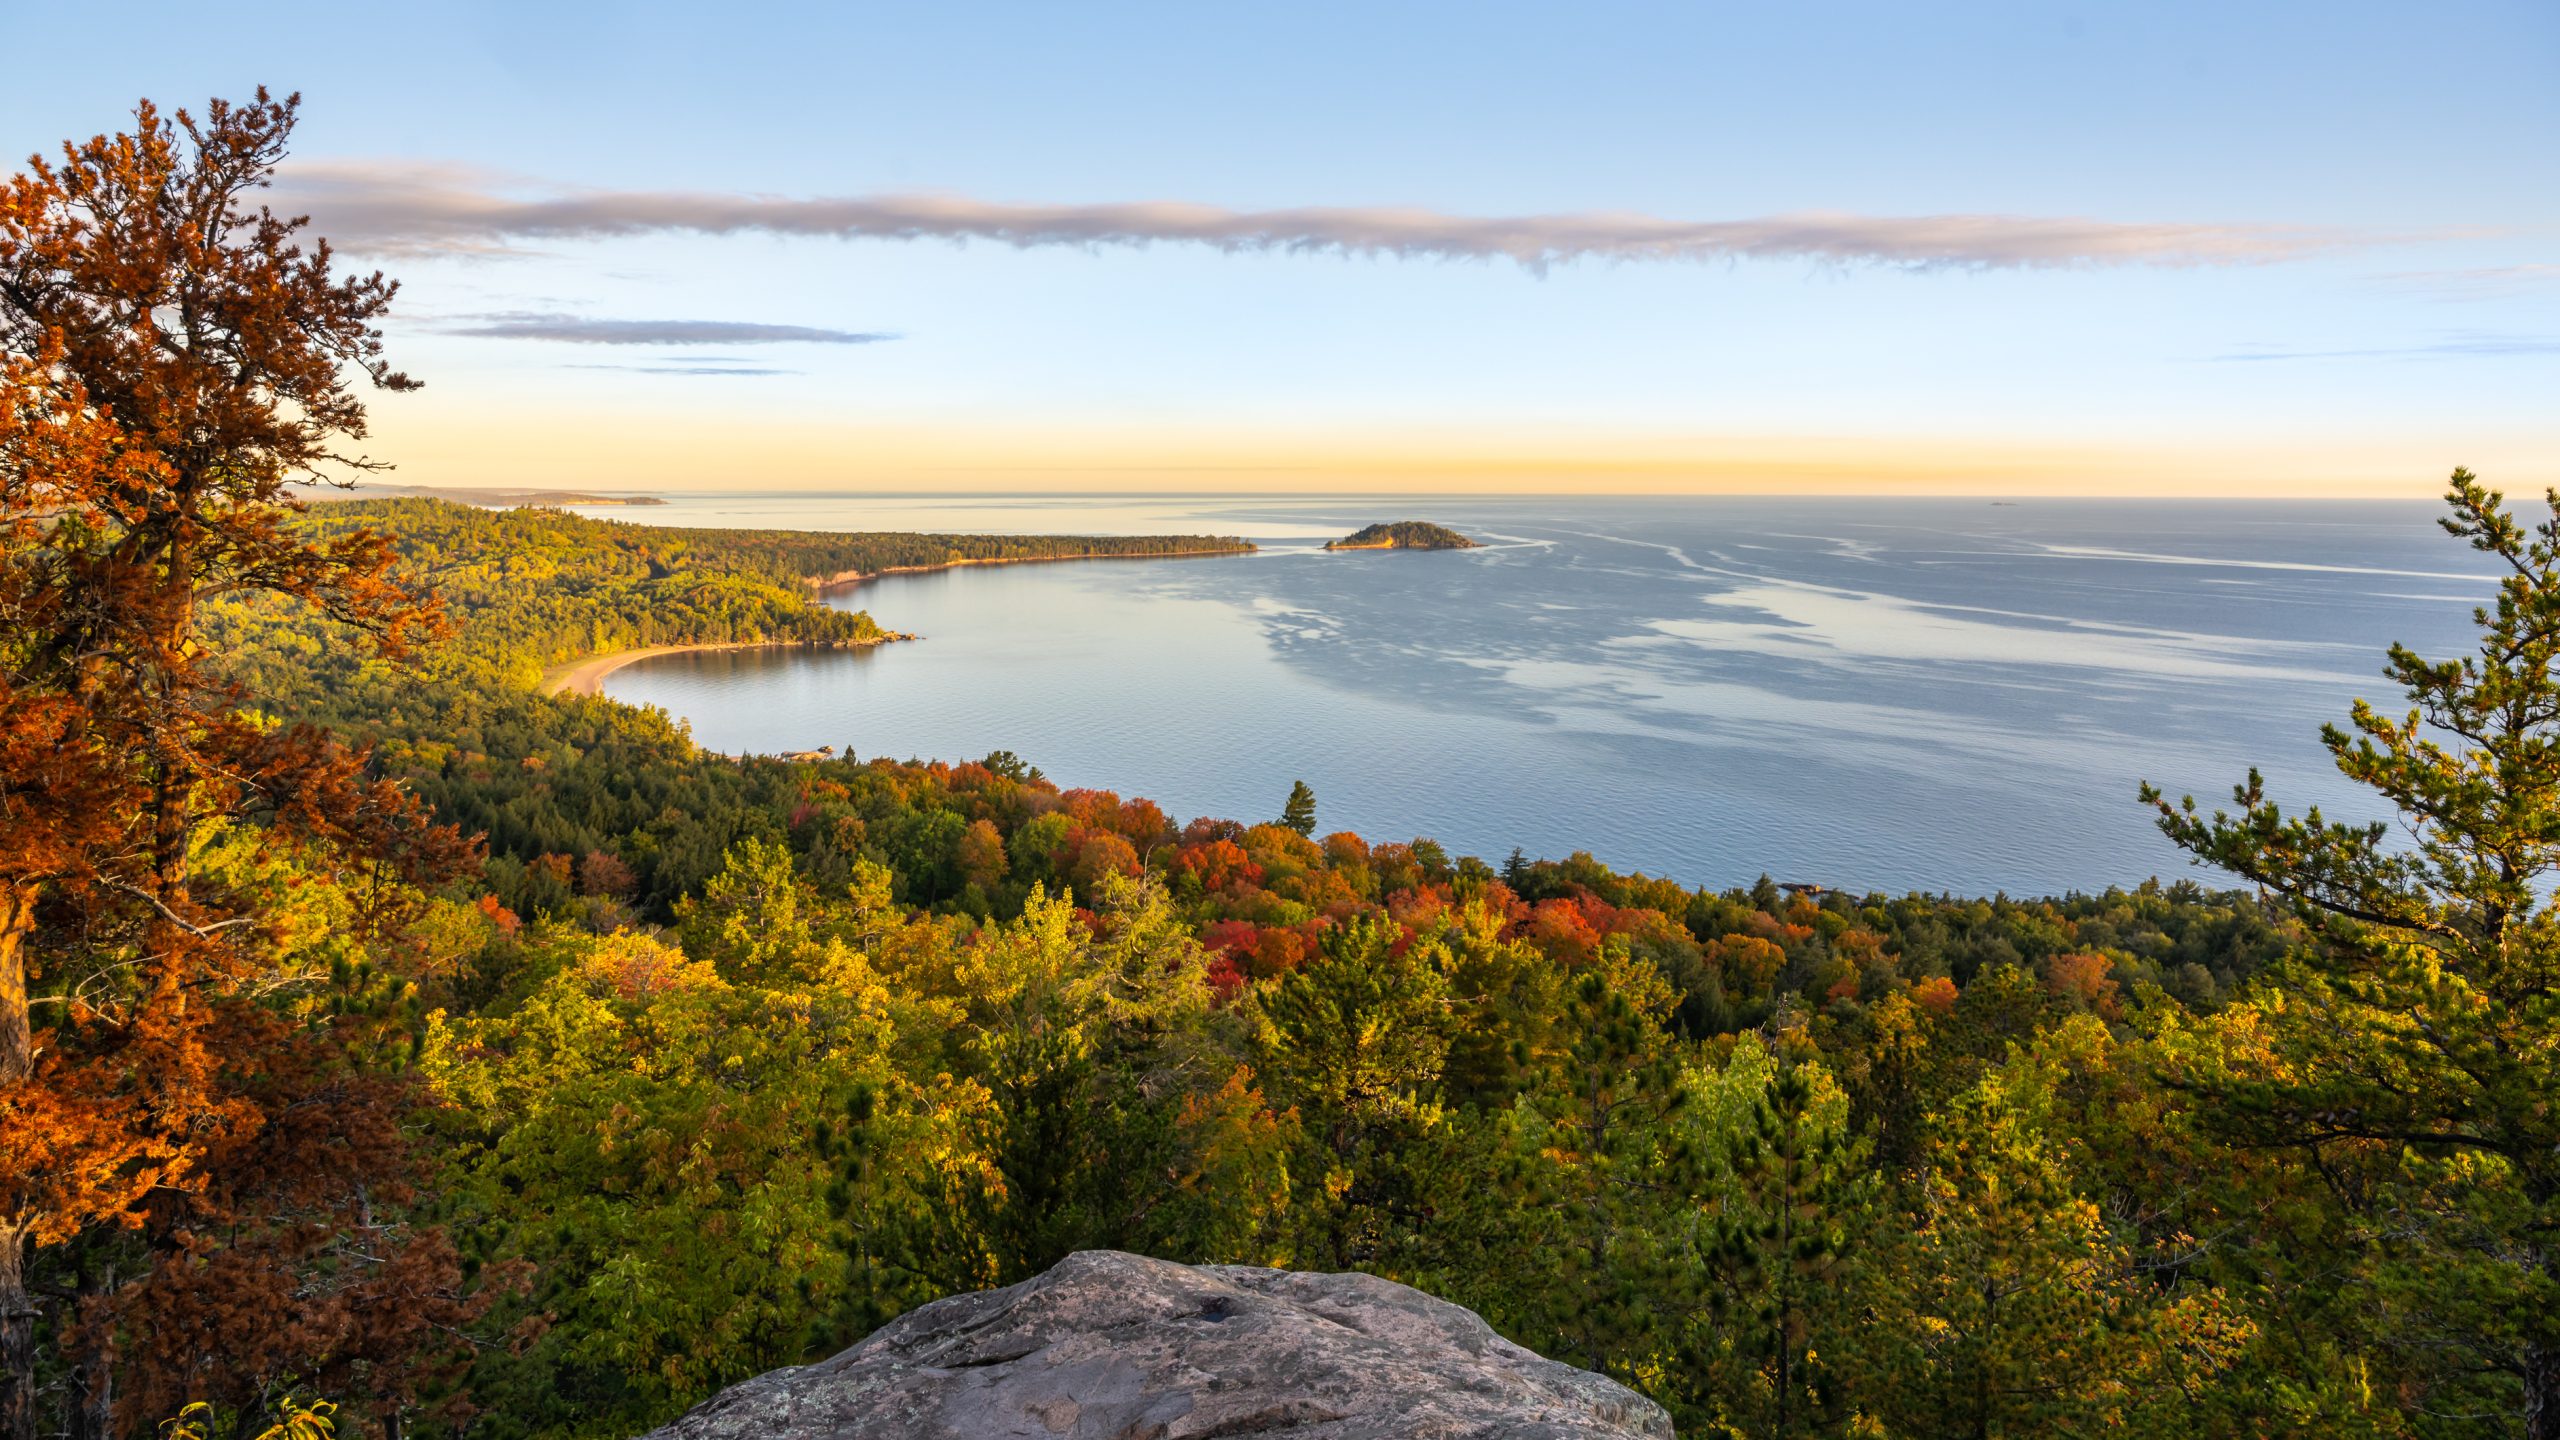 Up North3 '21 - Dawn breaks over the Little Presque Isle and Lake Superior, from Sugarloaf Mtn, Marquette, Michigan.